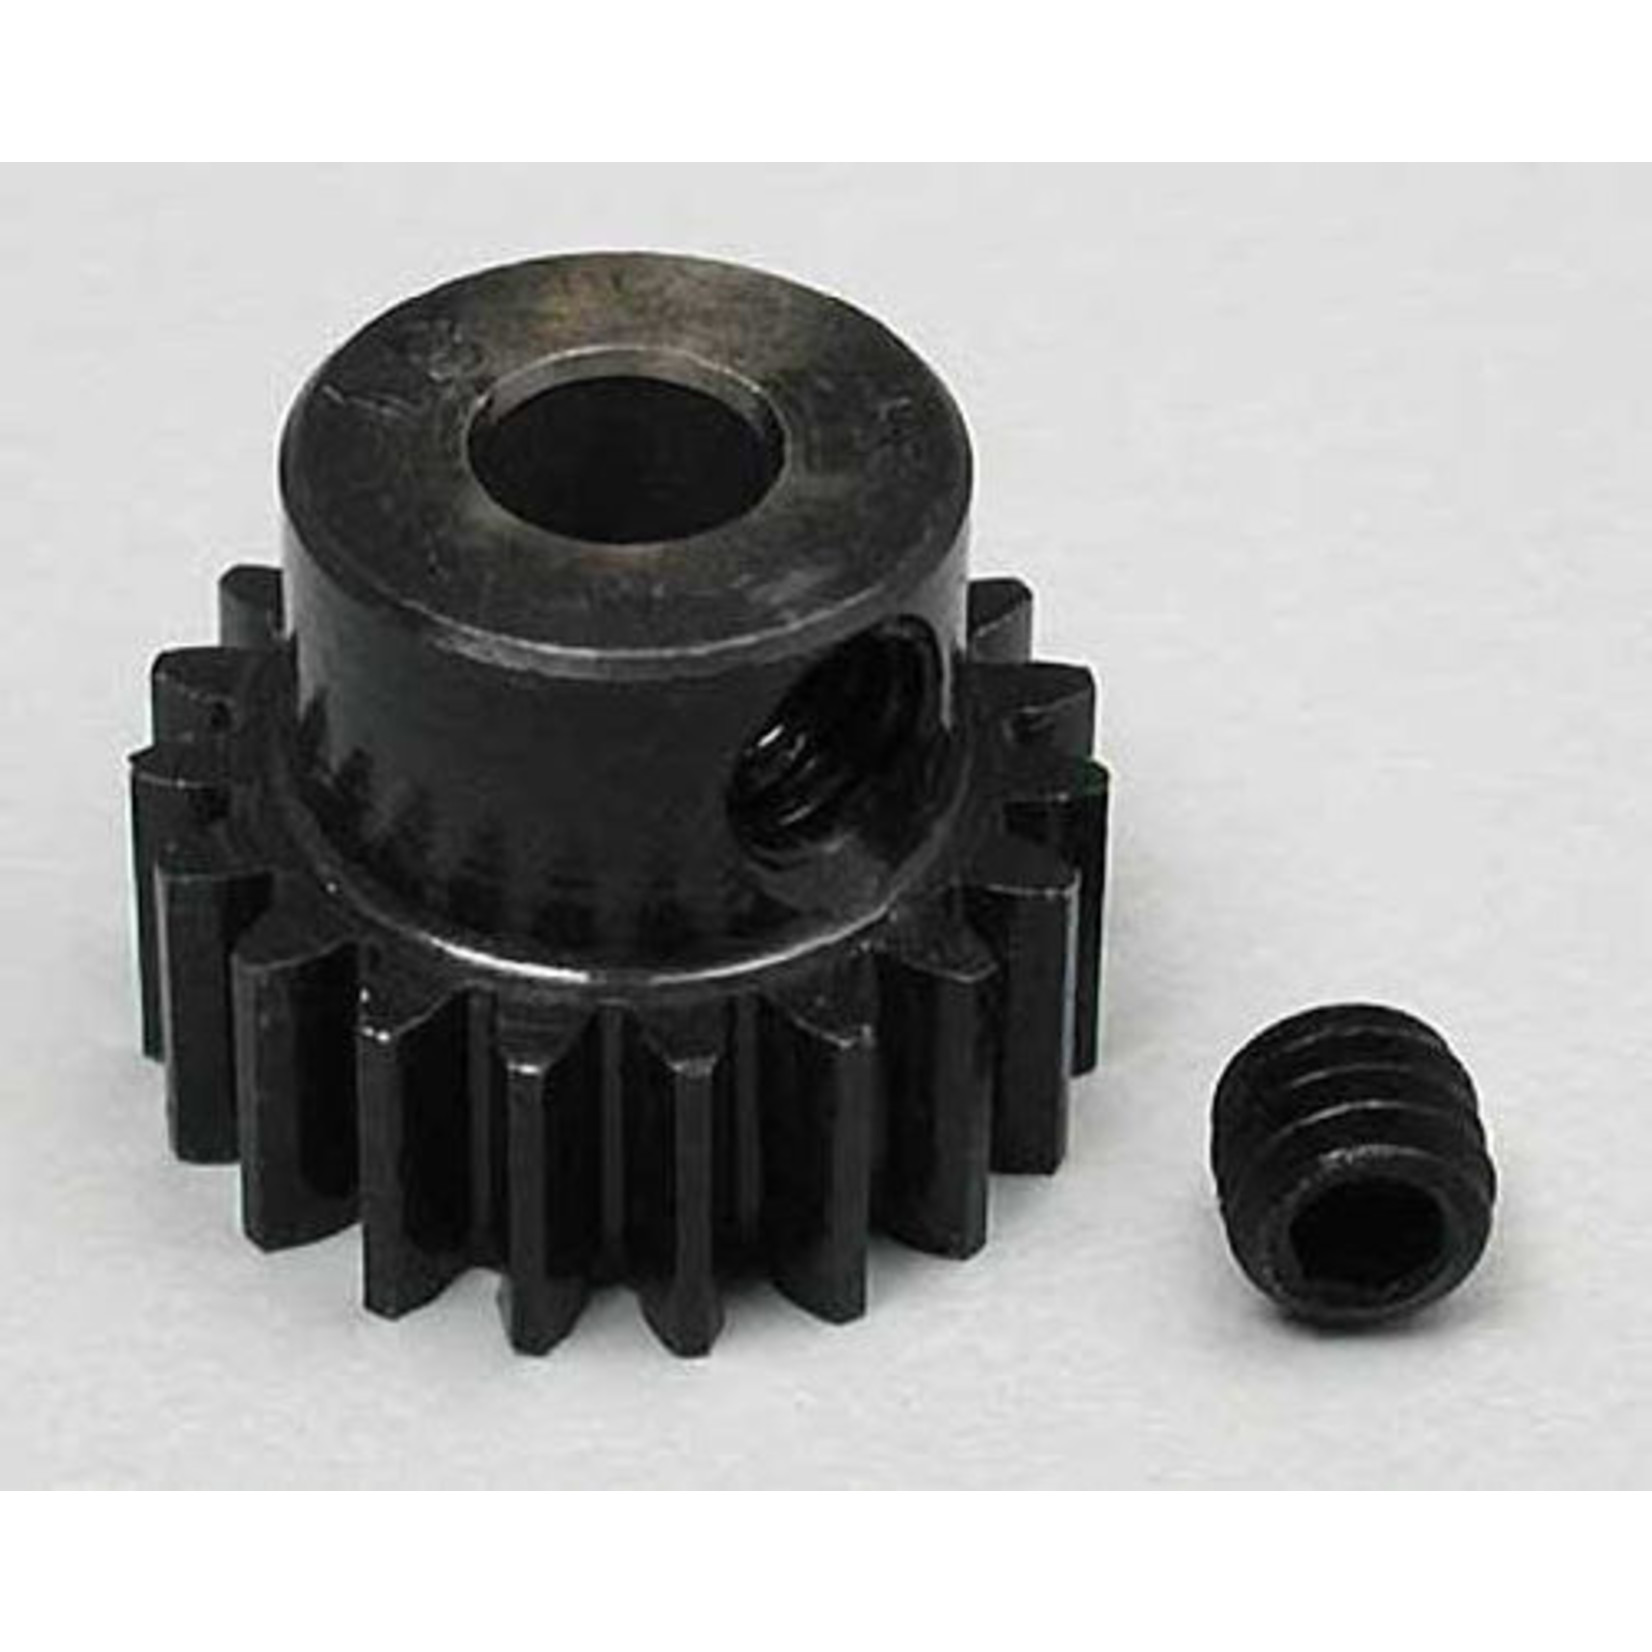 Robinson Racing RRP1419 - 19T ABSOLUTE PINION 48P